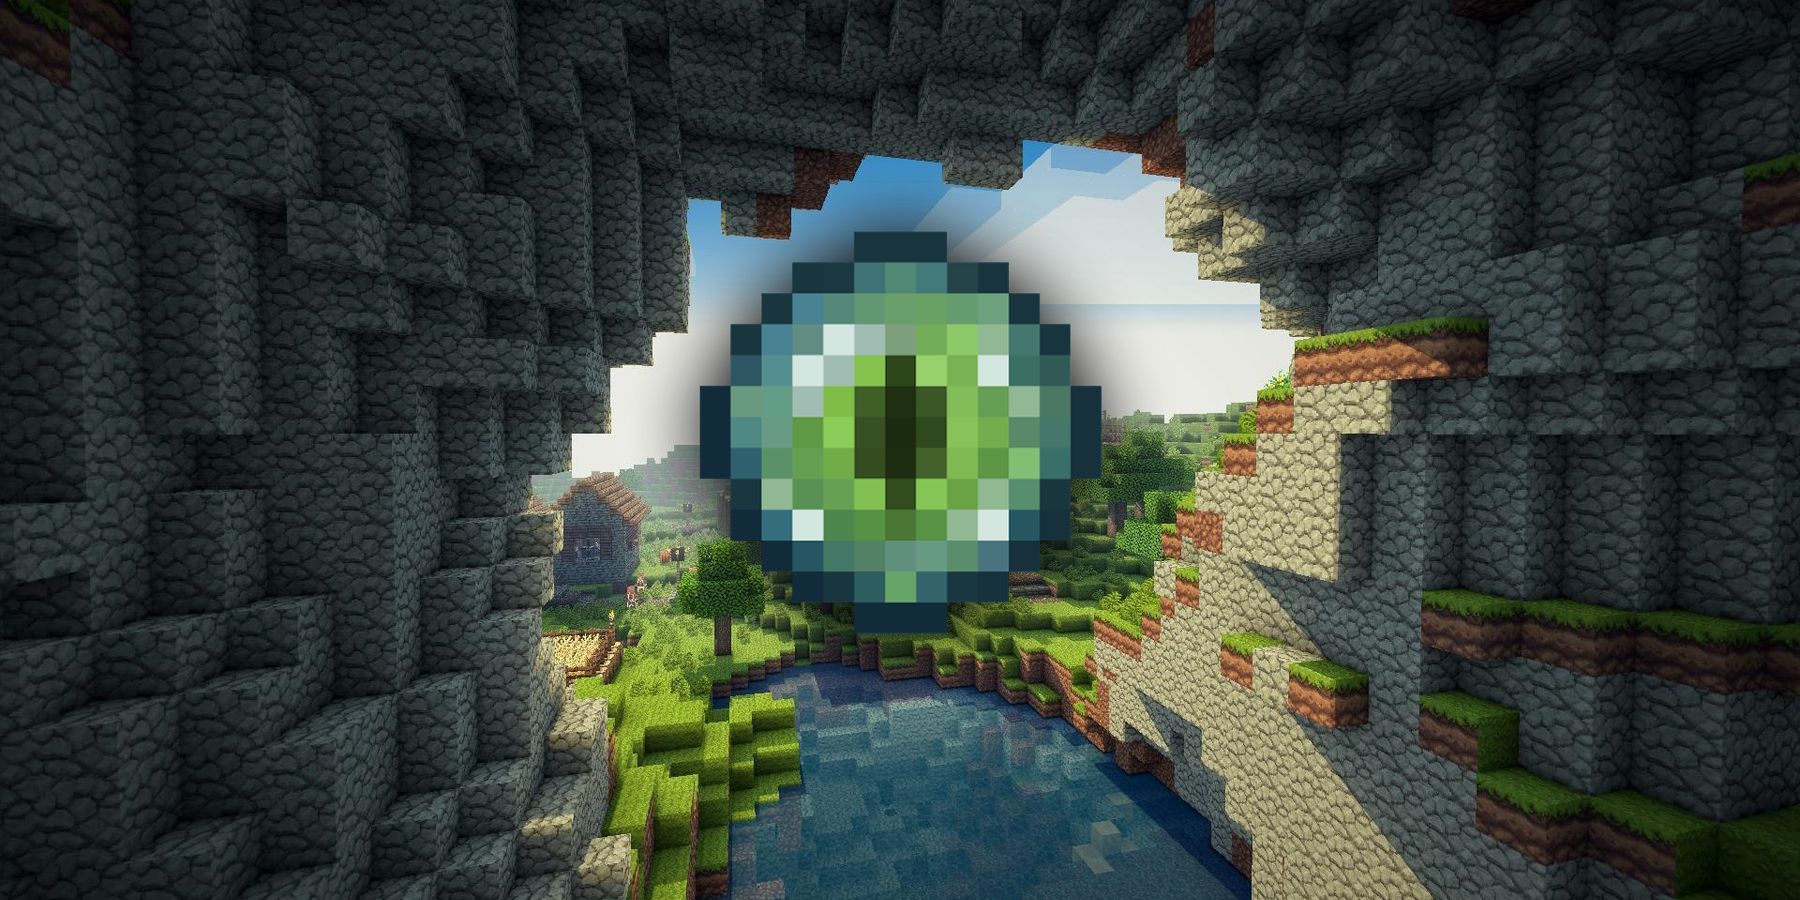 Image of the Eye of Ender overlaid on a screenshot of a Minecraft cave